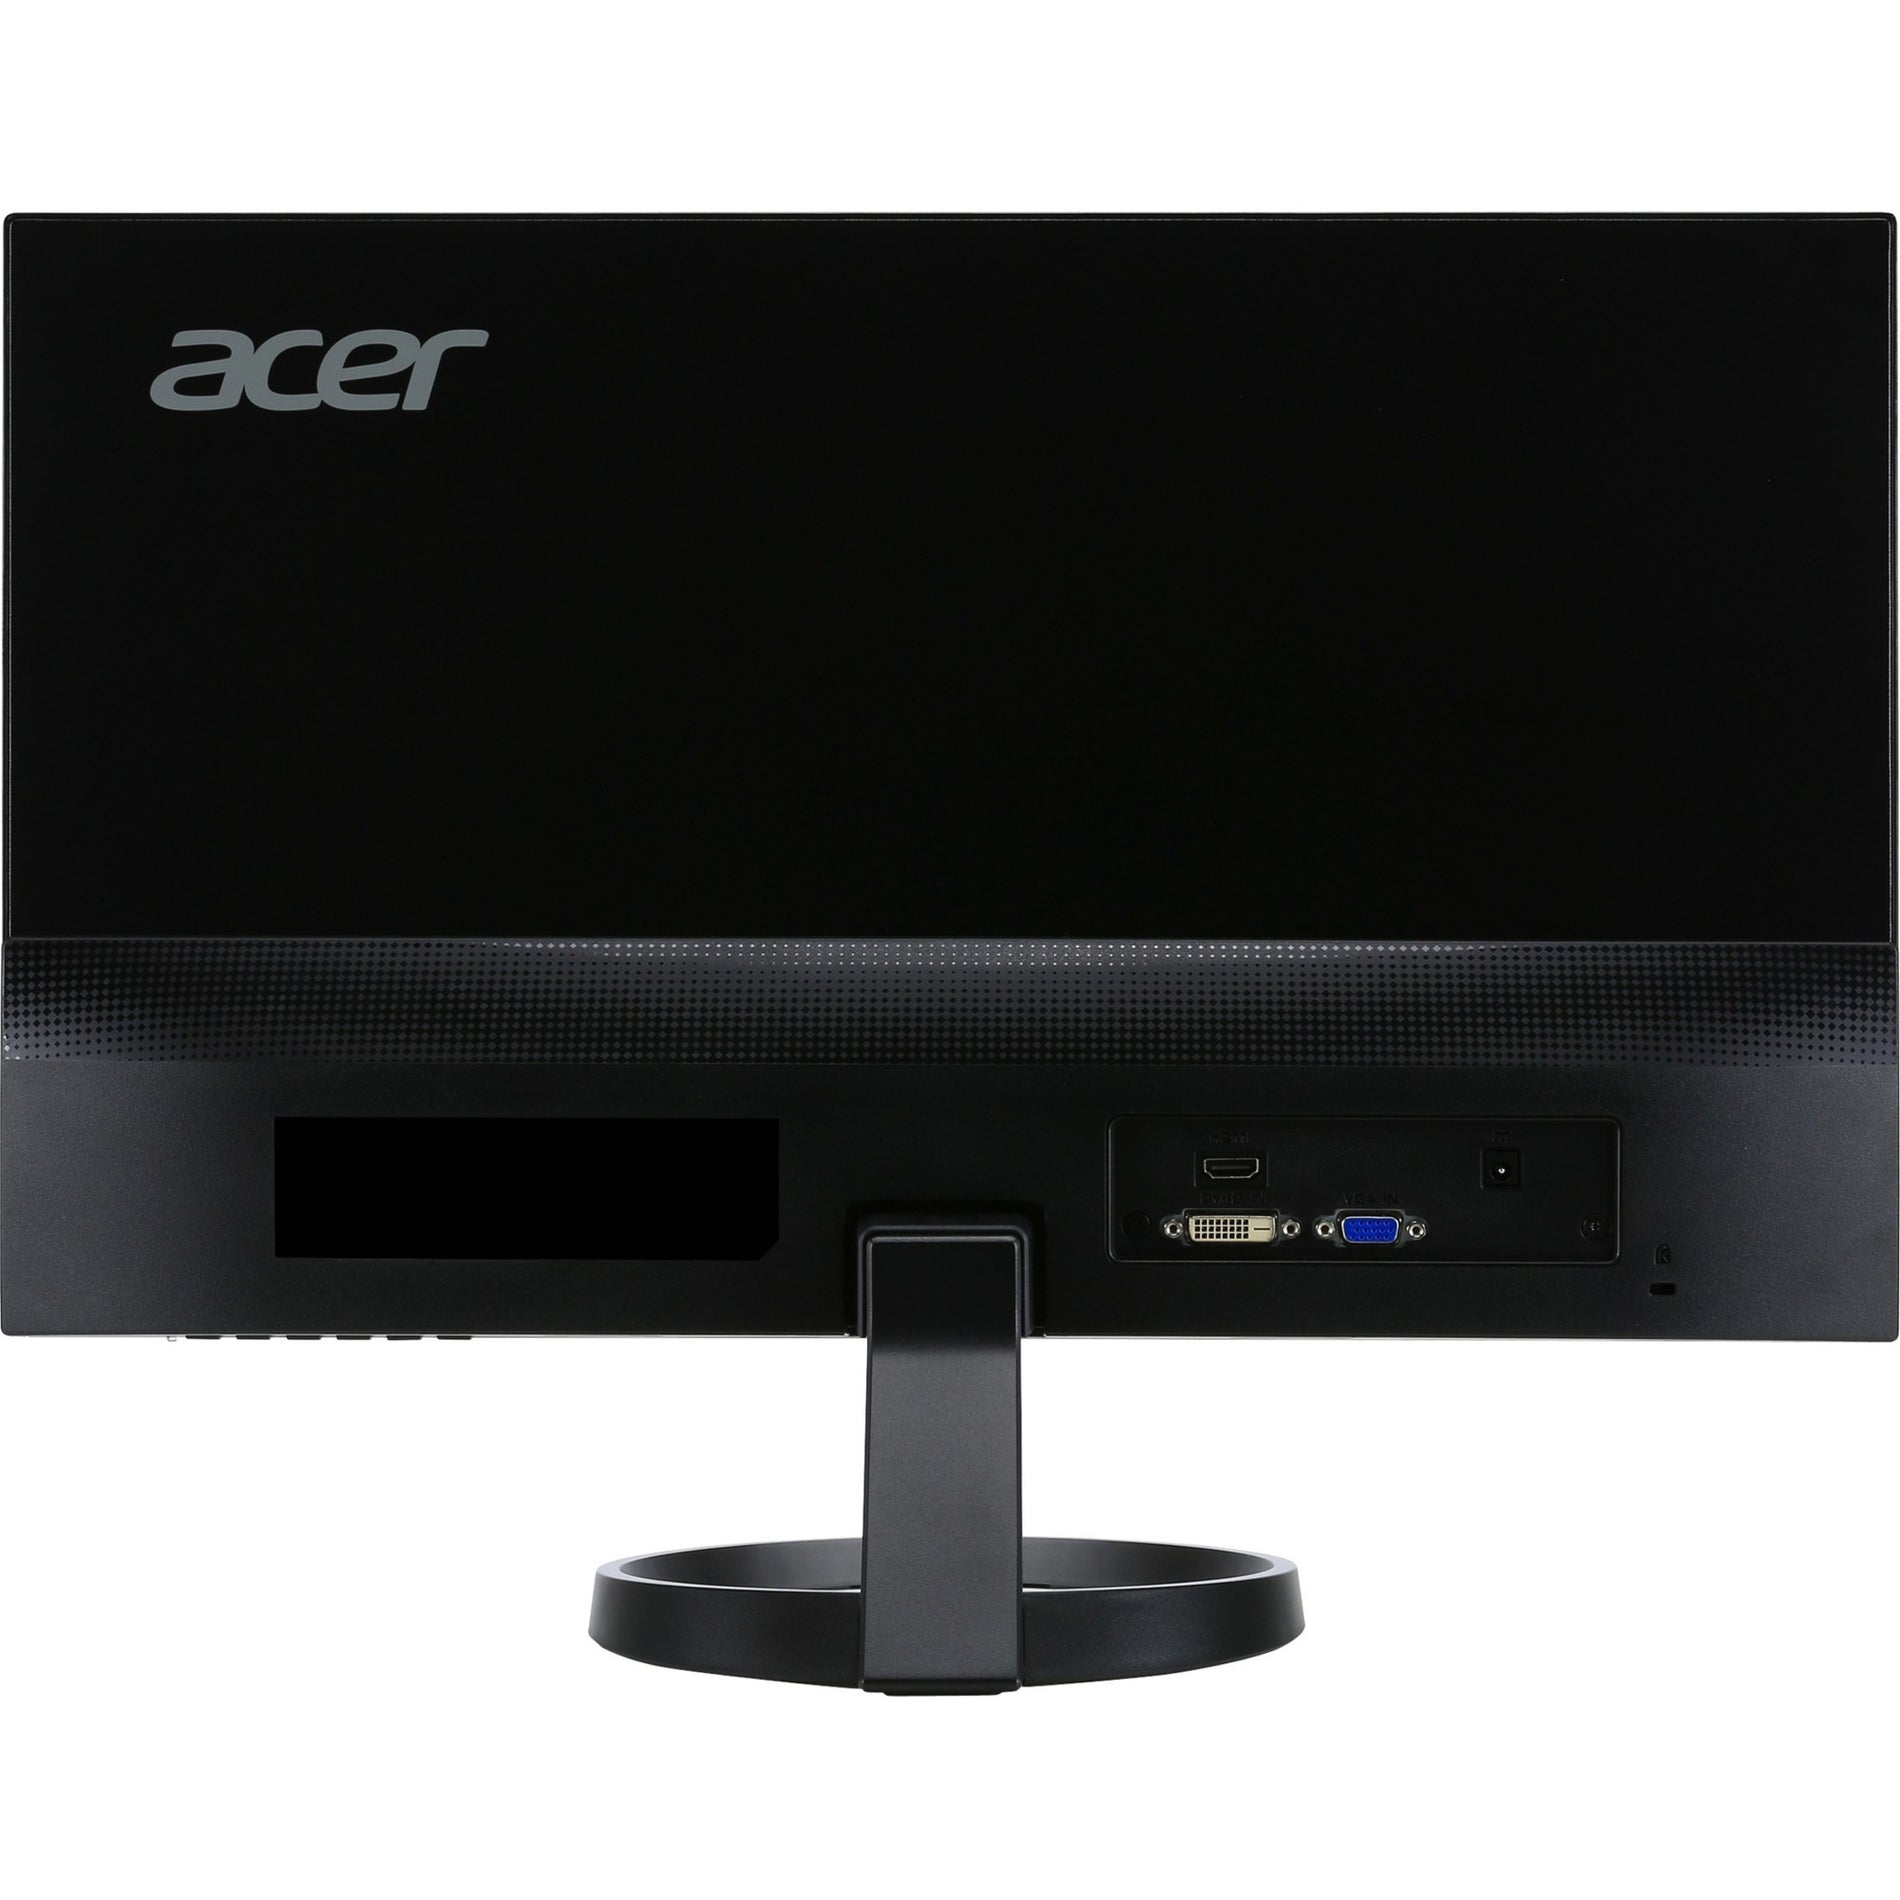 Acer R241Y 23.8" Full HD LCD Monitor - Black [Discontinued]